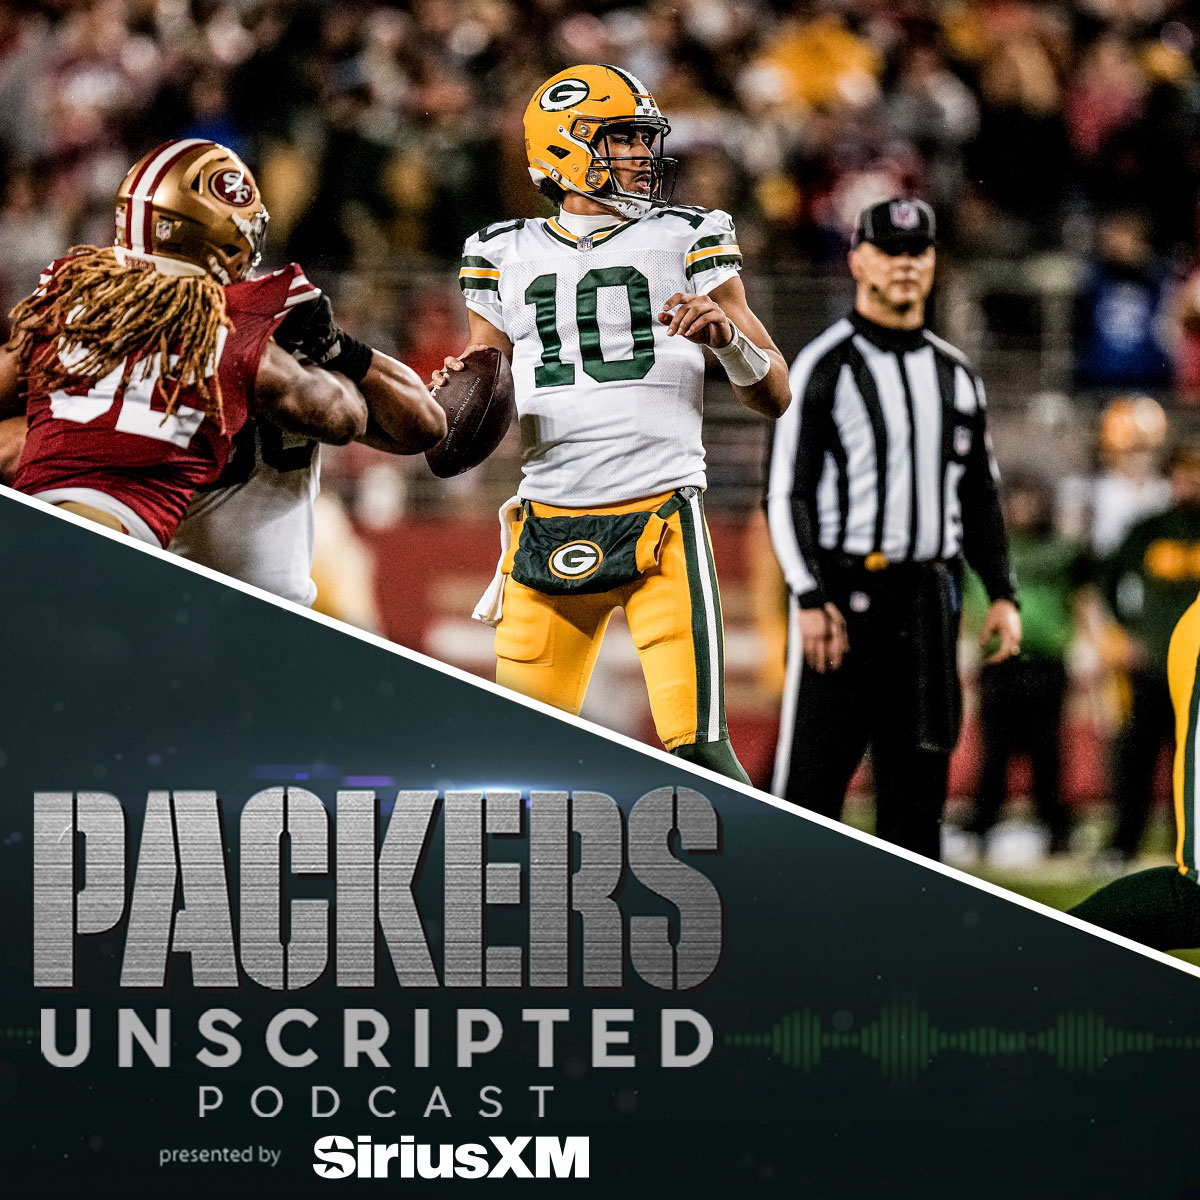 #764 Packers Unscripted: That’s a wrap